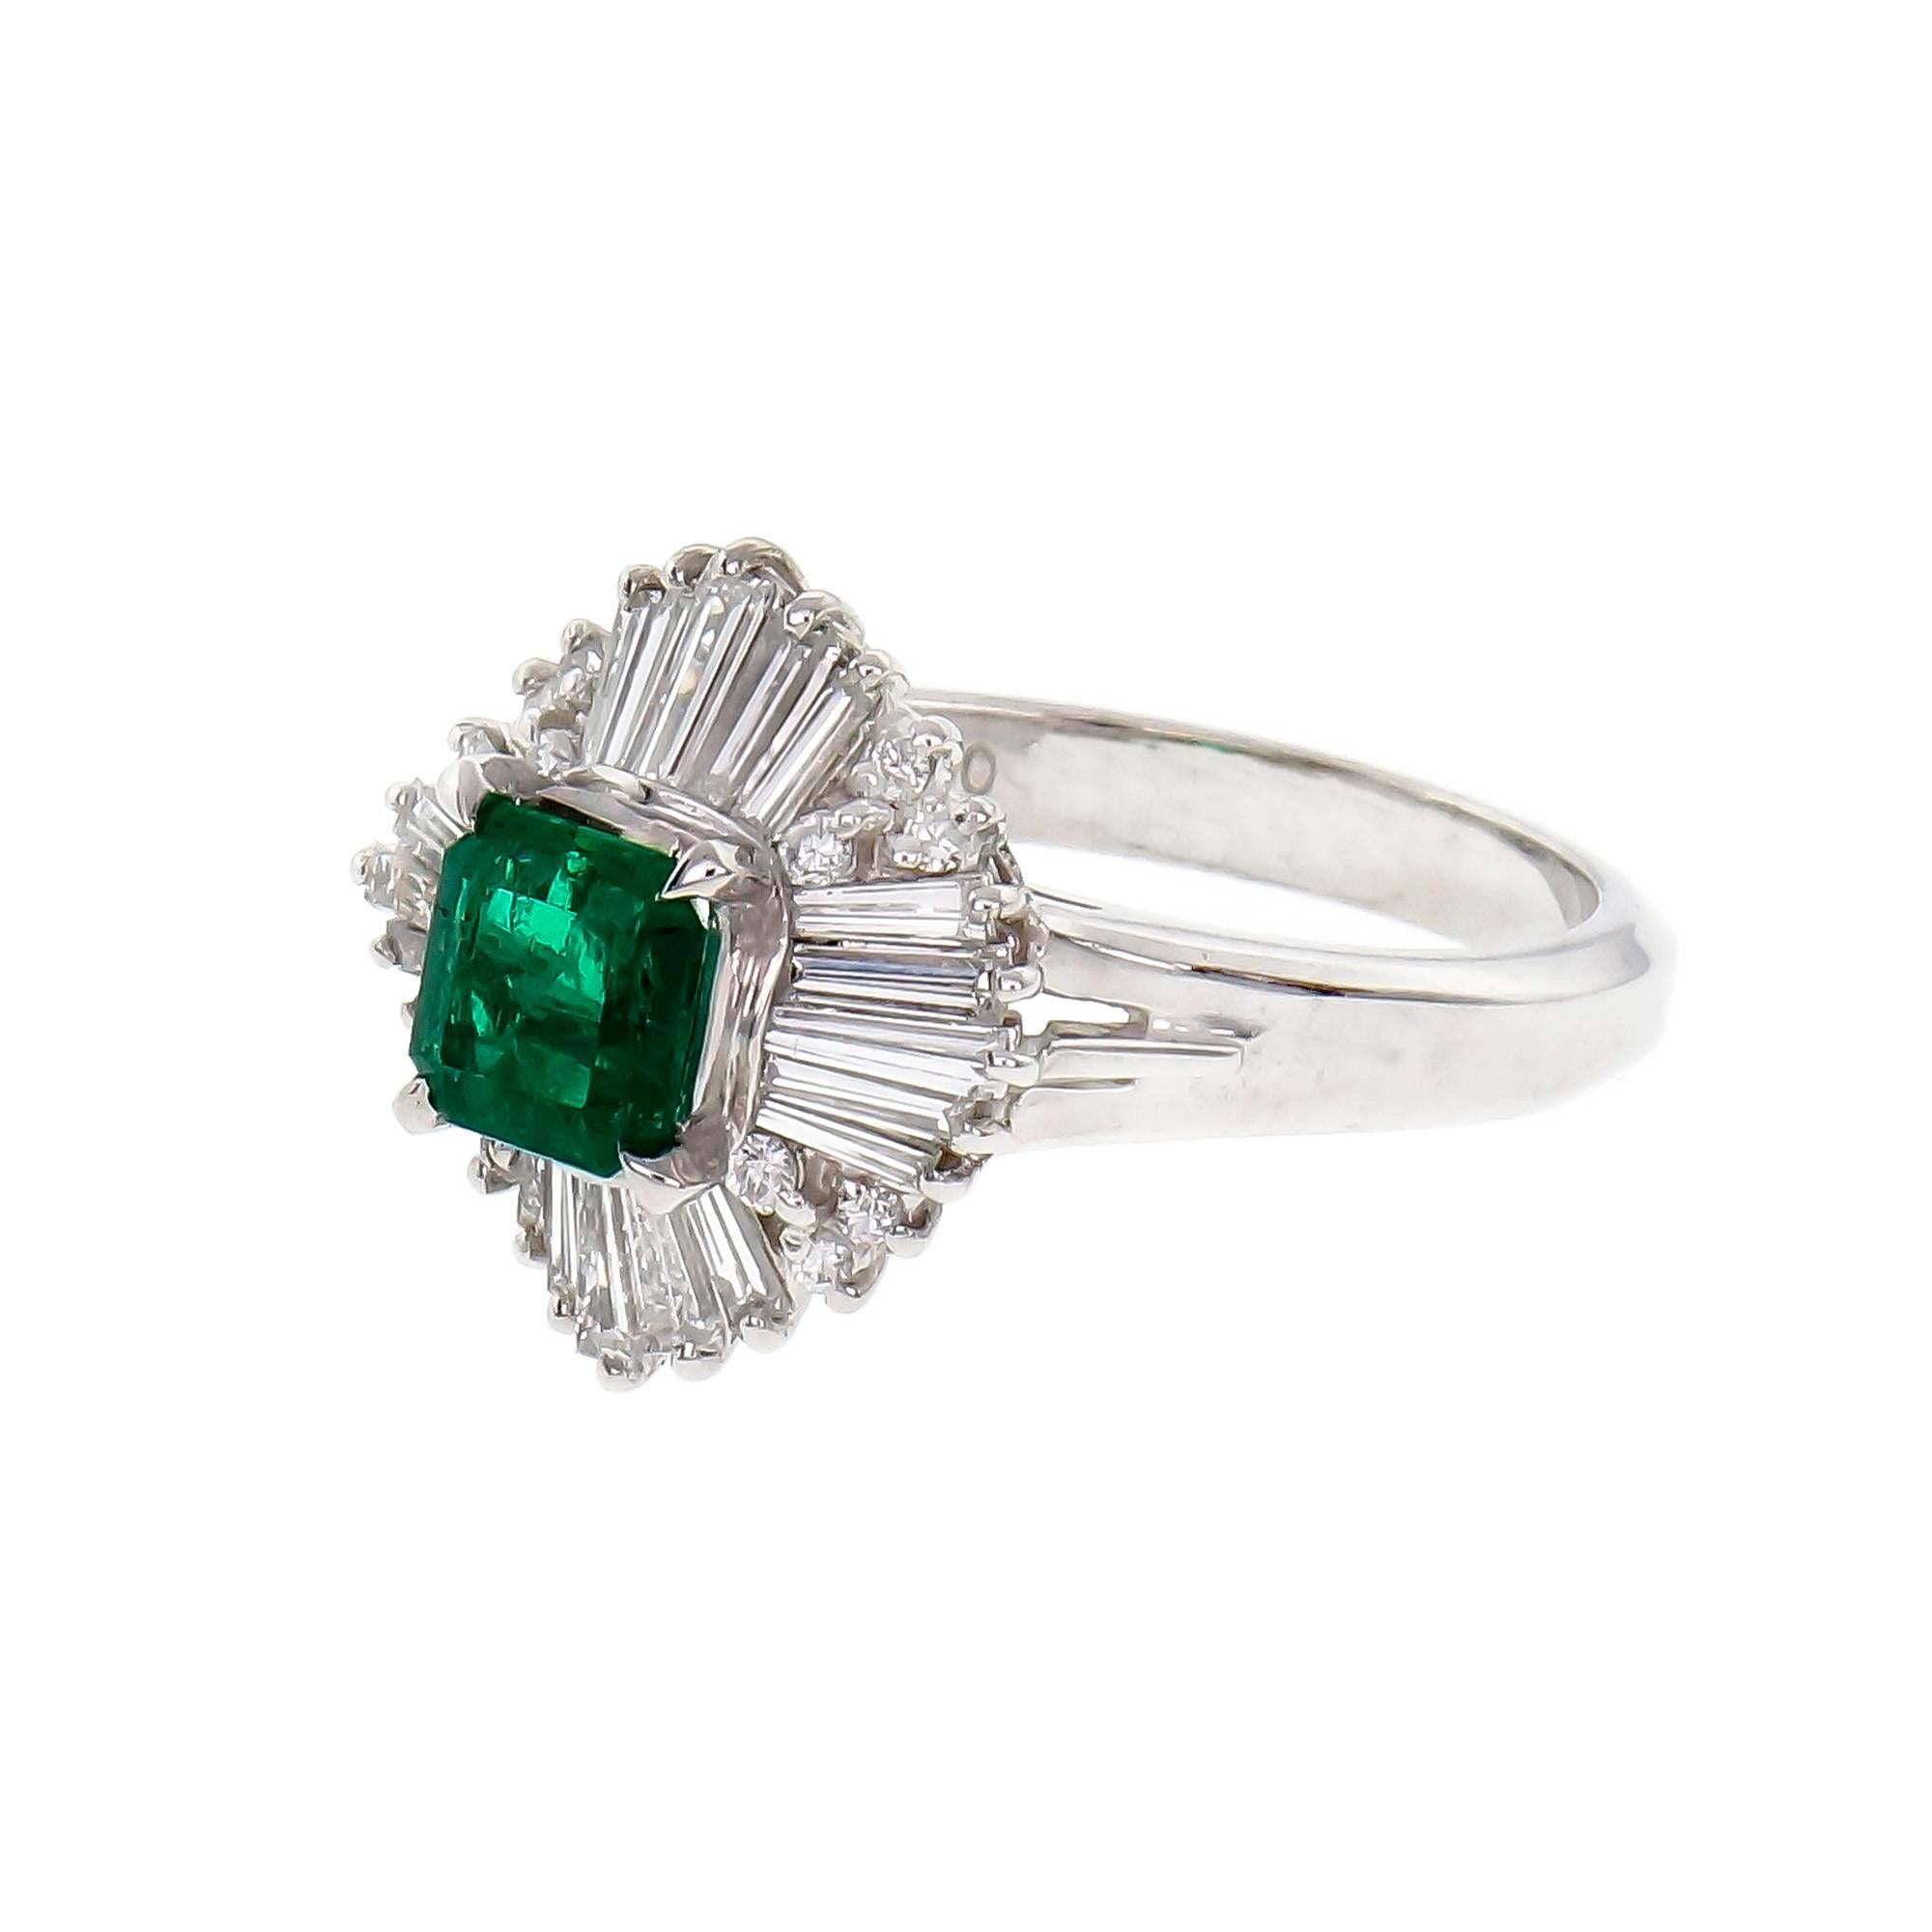 1960’s handmade Platinum Ballerina ring designed and made to show off a top color bright green natural Emerald. GIA certified natural Emerald low-level clarity enhancement F1. Very bright color, moderate plus inclusions.

1 octagonal Emerald cut